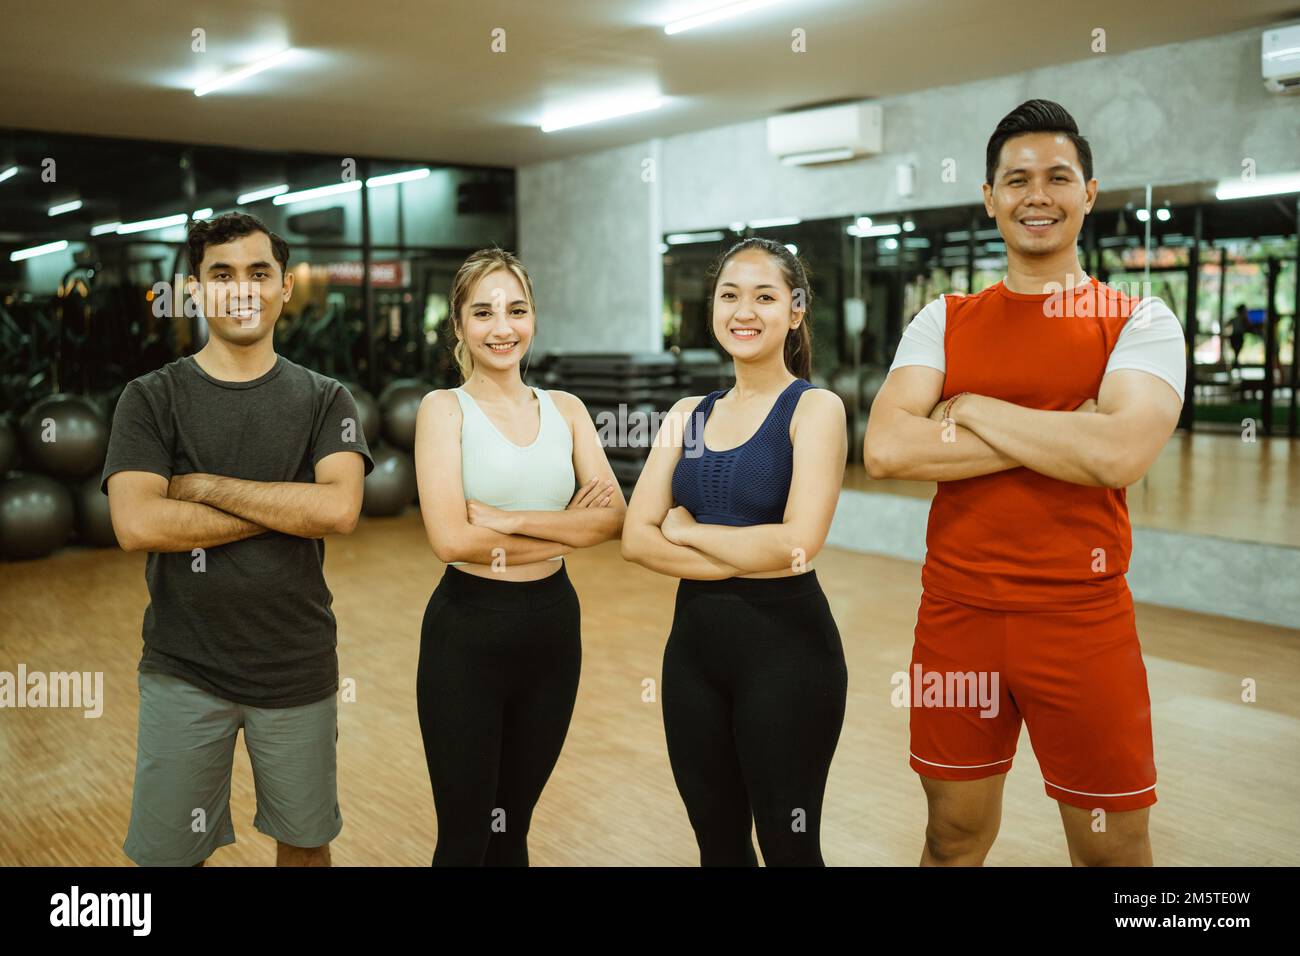 Group of diverse young friends in gym after exercise Stock Photo